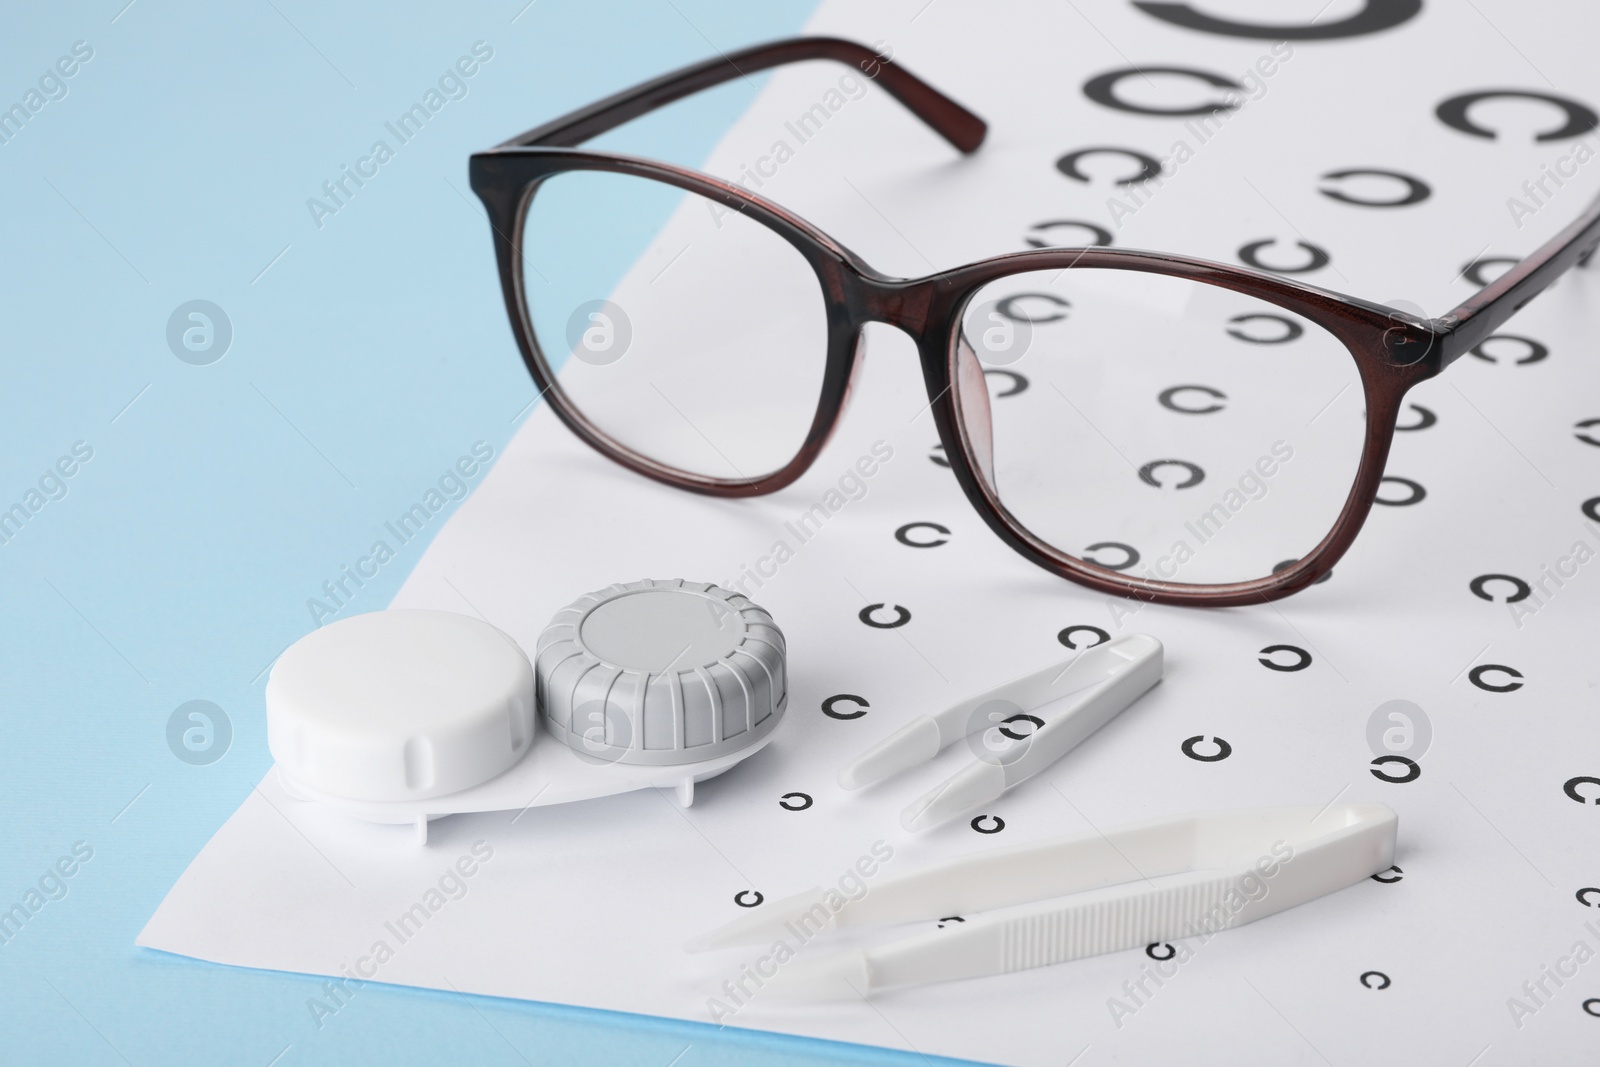 Photo of Vision test chart, glasses, lenses and tweezers on light blue background, closeup